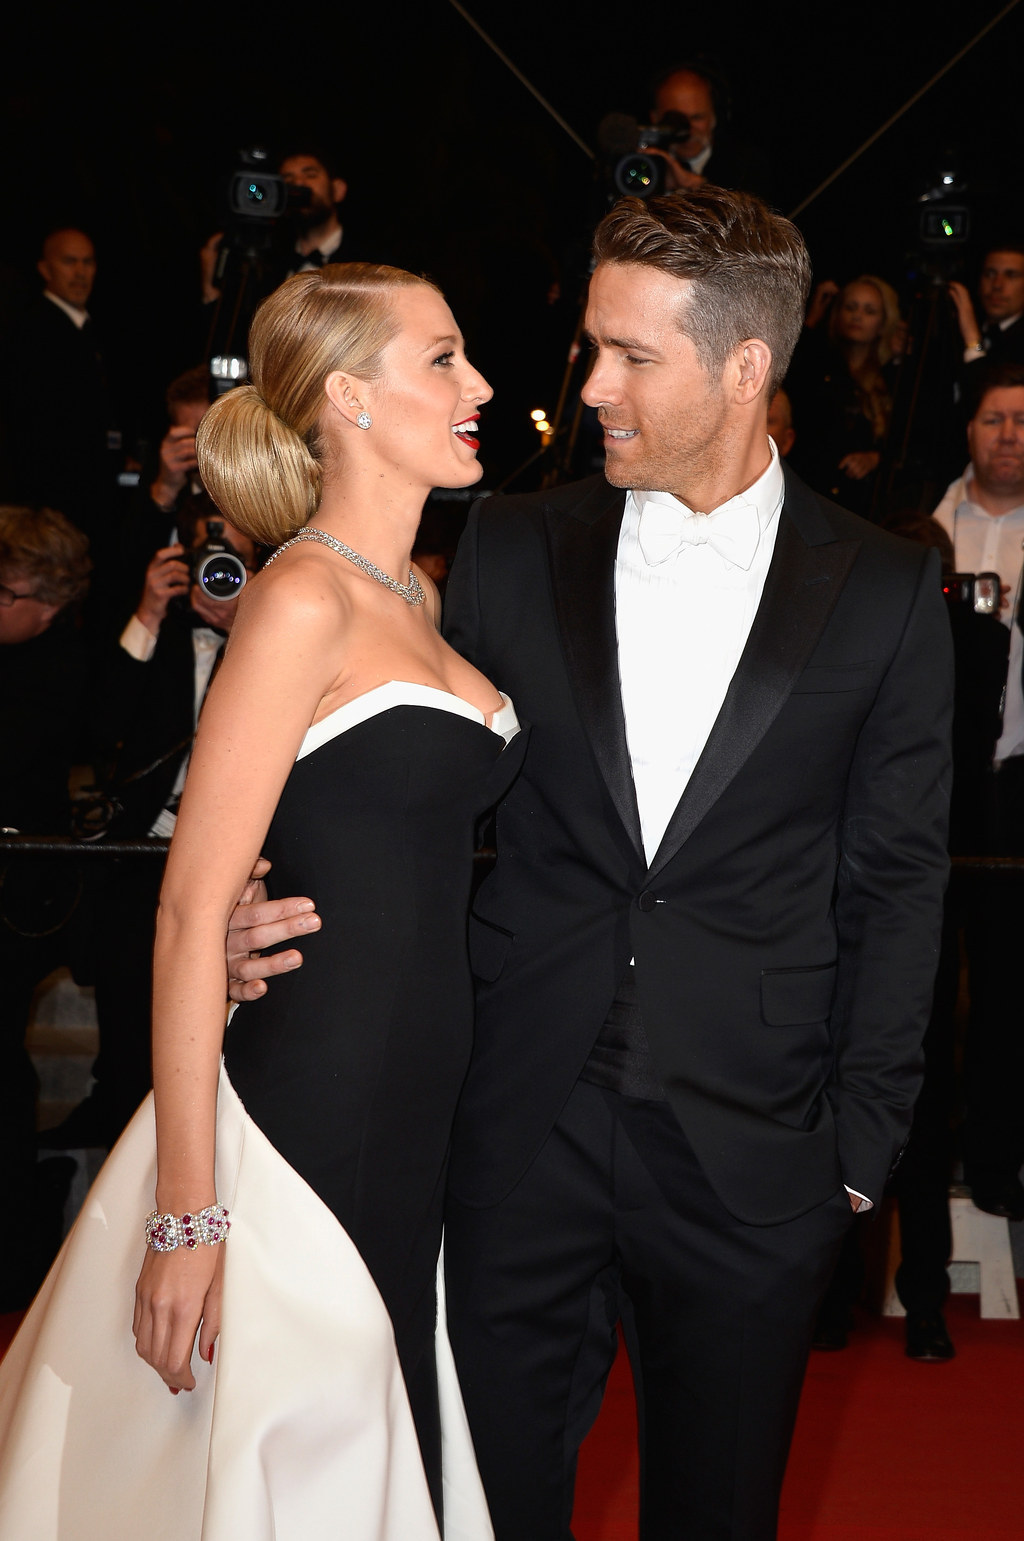 15 Photos Of Blake Lively Smiling With Her Husband Ryan Reynolds At Cannes